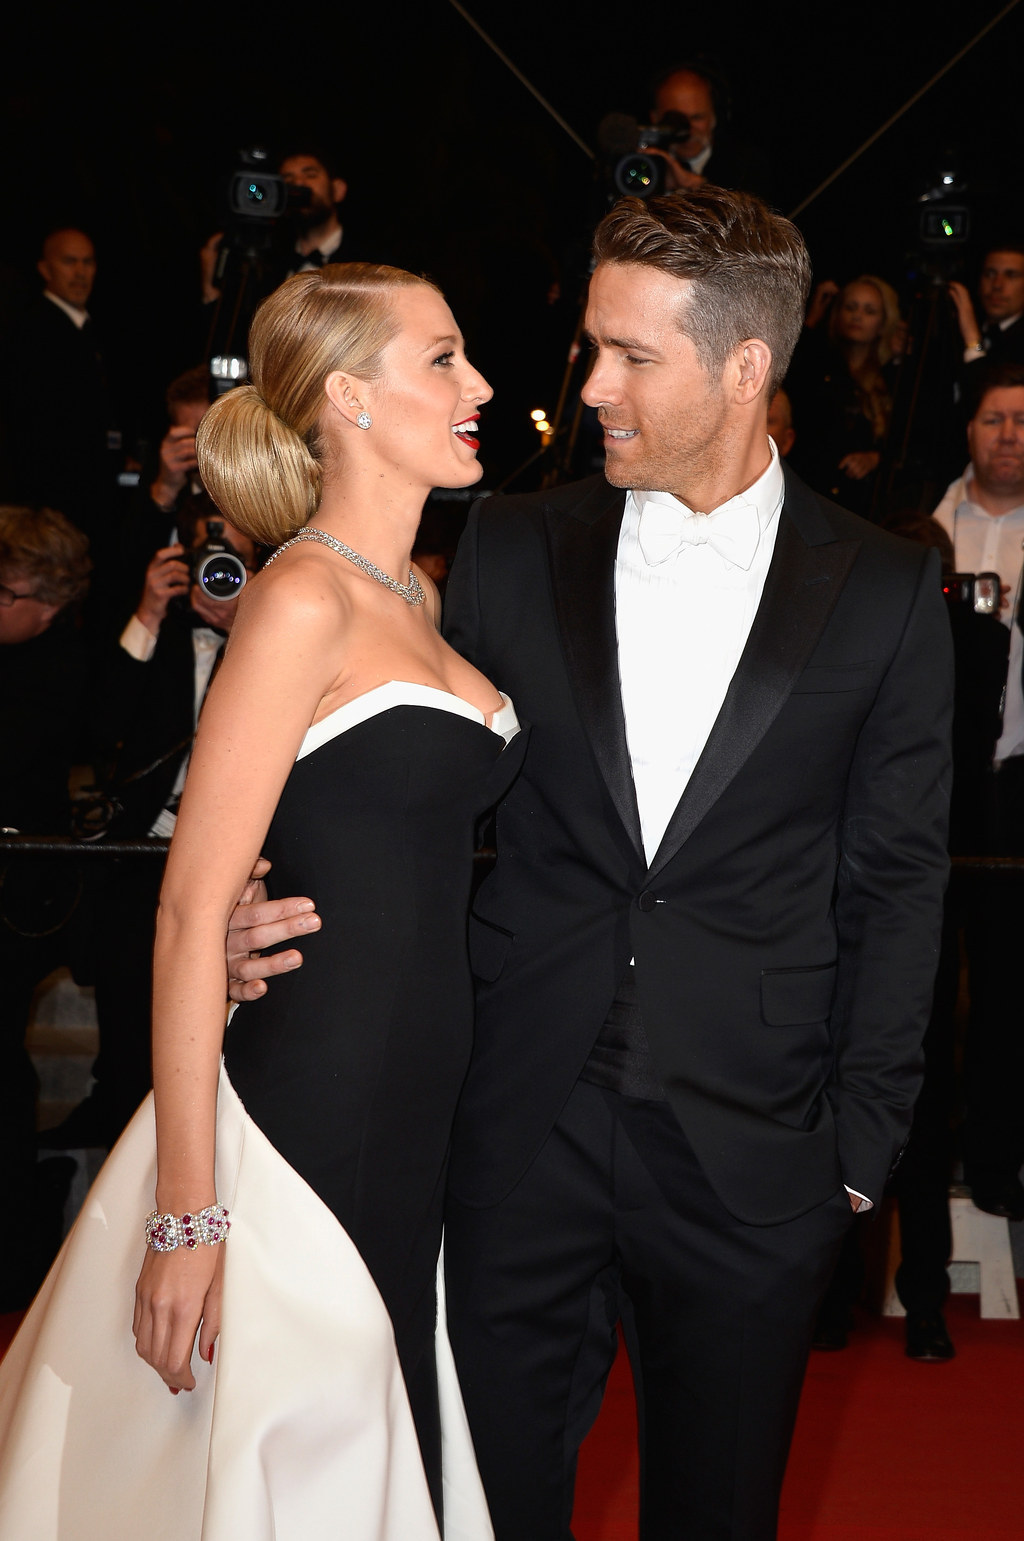 15 Photos Of Blake Lively Smiling With Her Husband Ryan Reynolds At Cannes